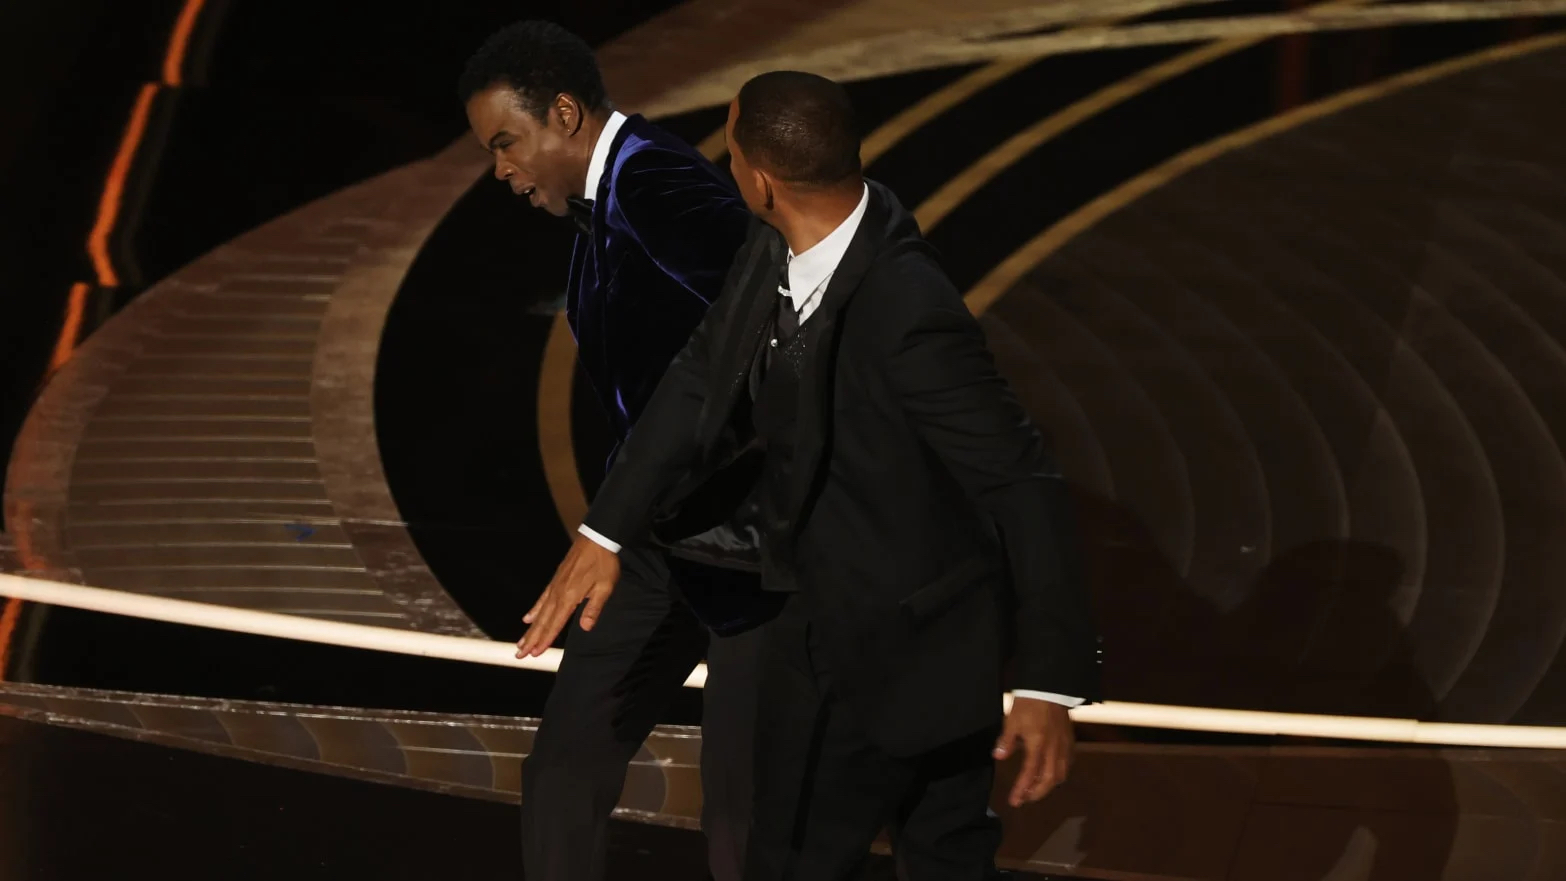 USAfrica: Chris Rock deserved Will Smith’s smack for disrespecting his wife in his presence. By Ken Okorie